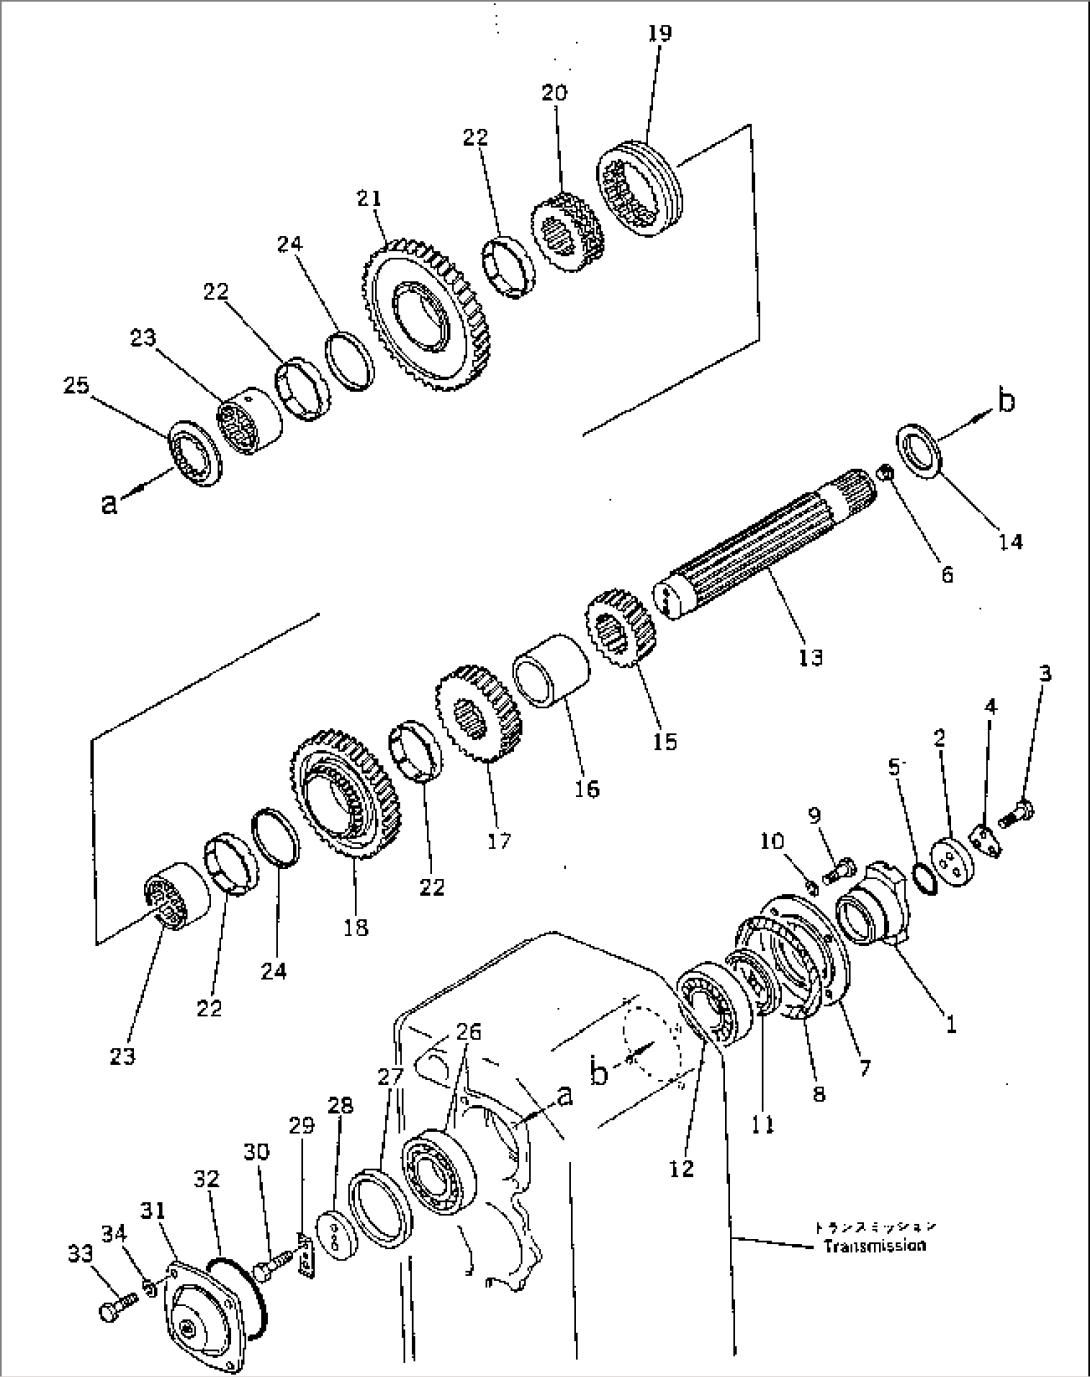 TRANSMISSION (3RD AND 4TH GEAR)